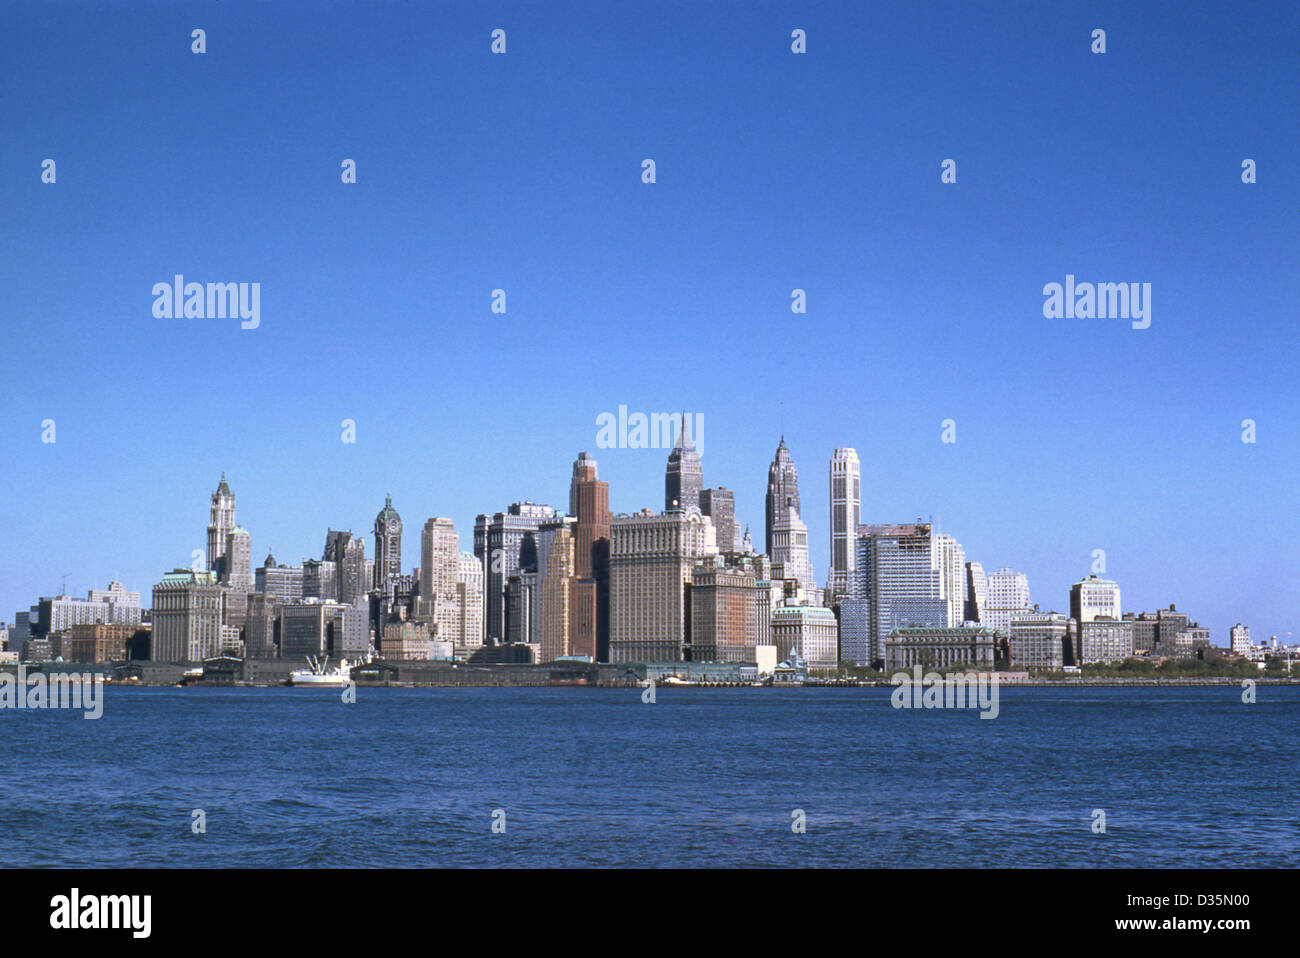 Vintage October 1958 photograph, Lower Manhattan from the East River. Stock Photo